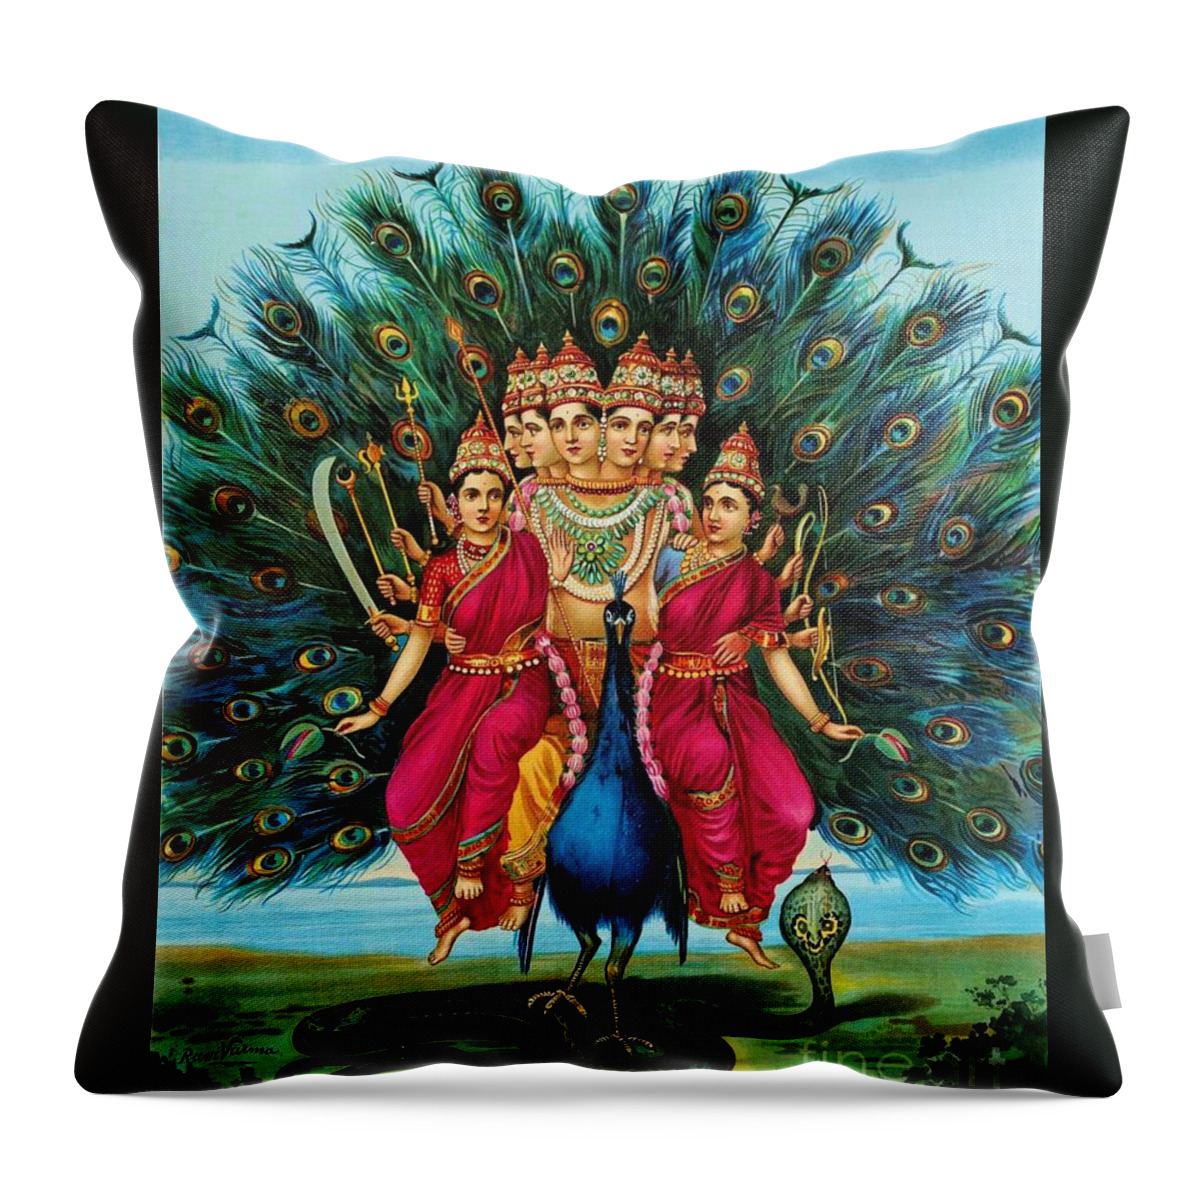 Pd Throw Pillow featuring the painting Murugan by Thea Recuerdo